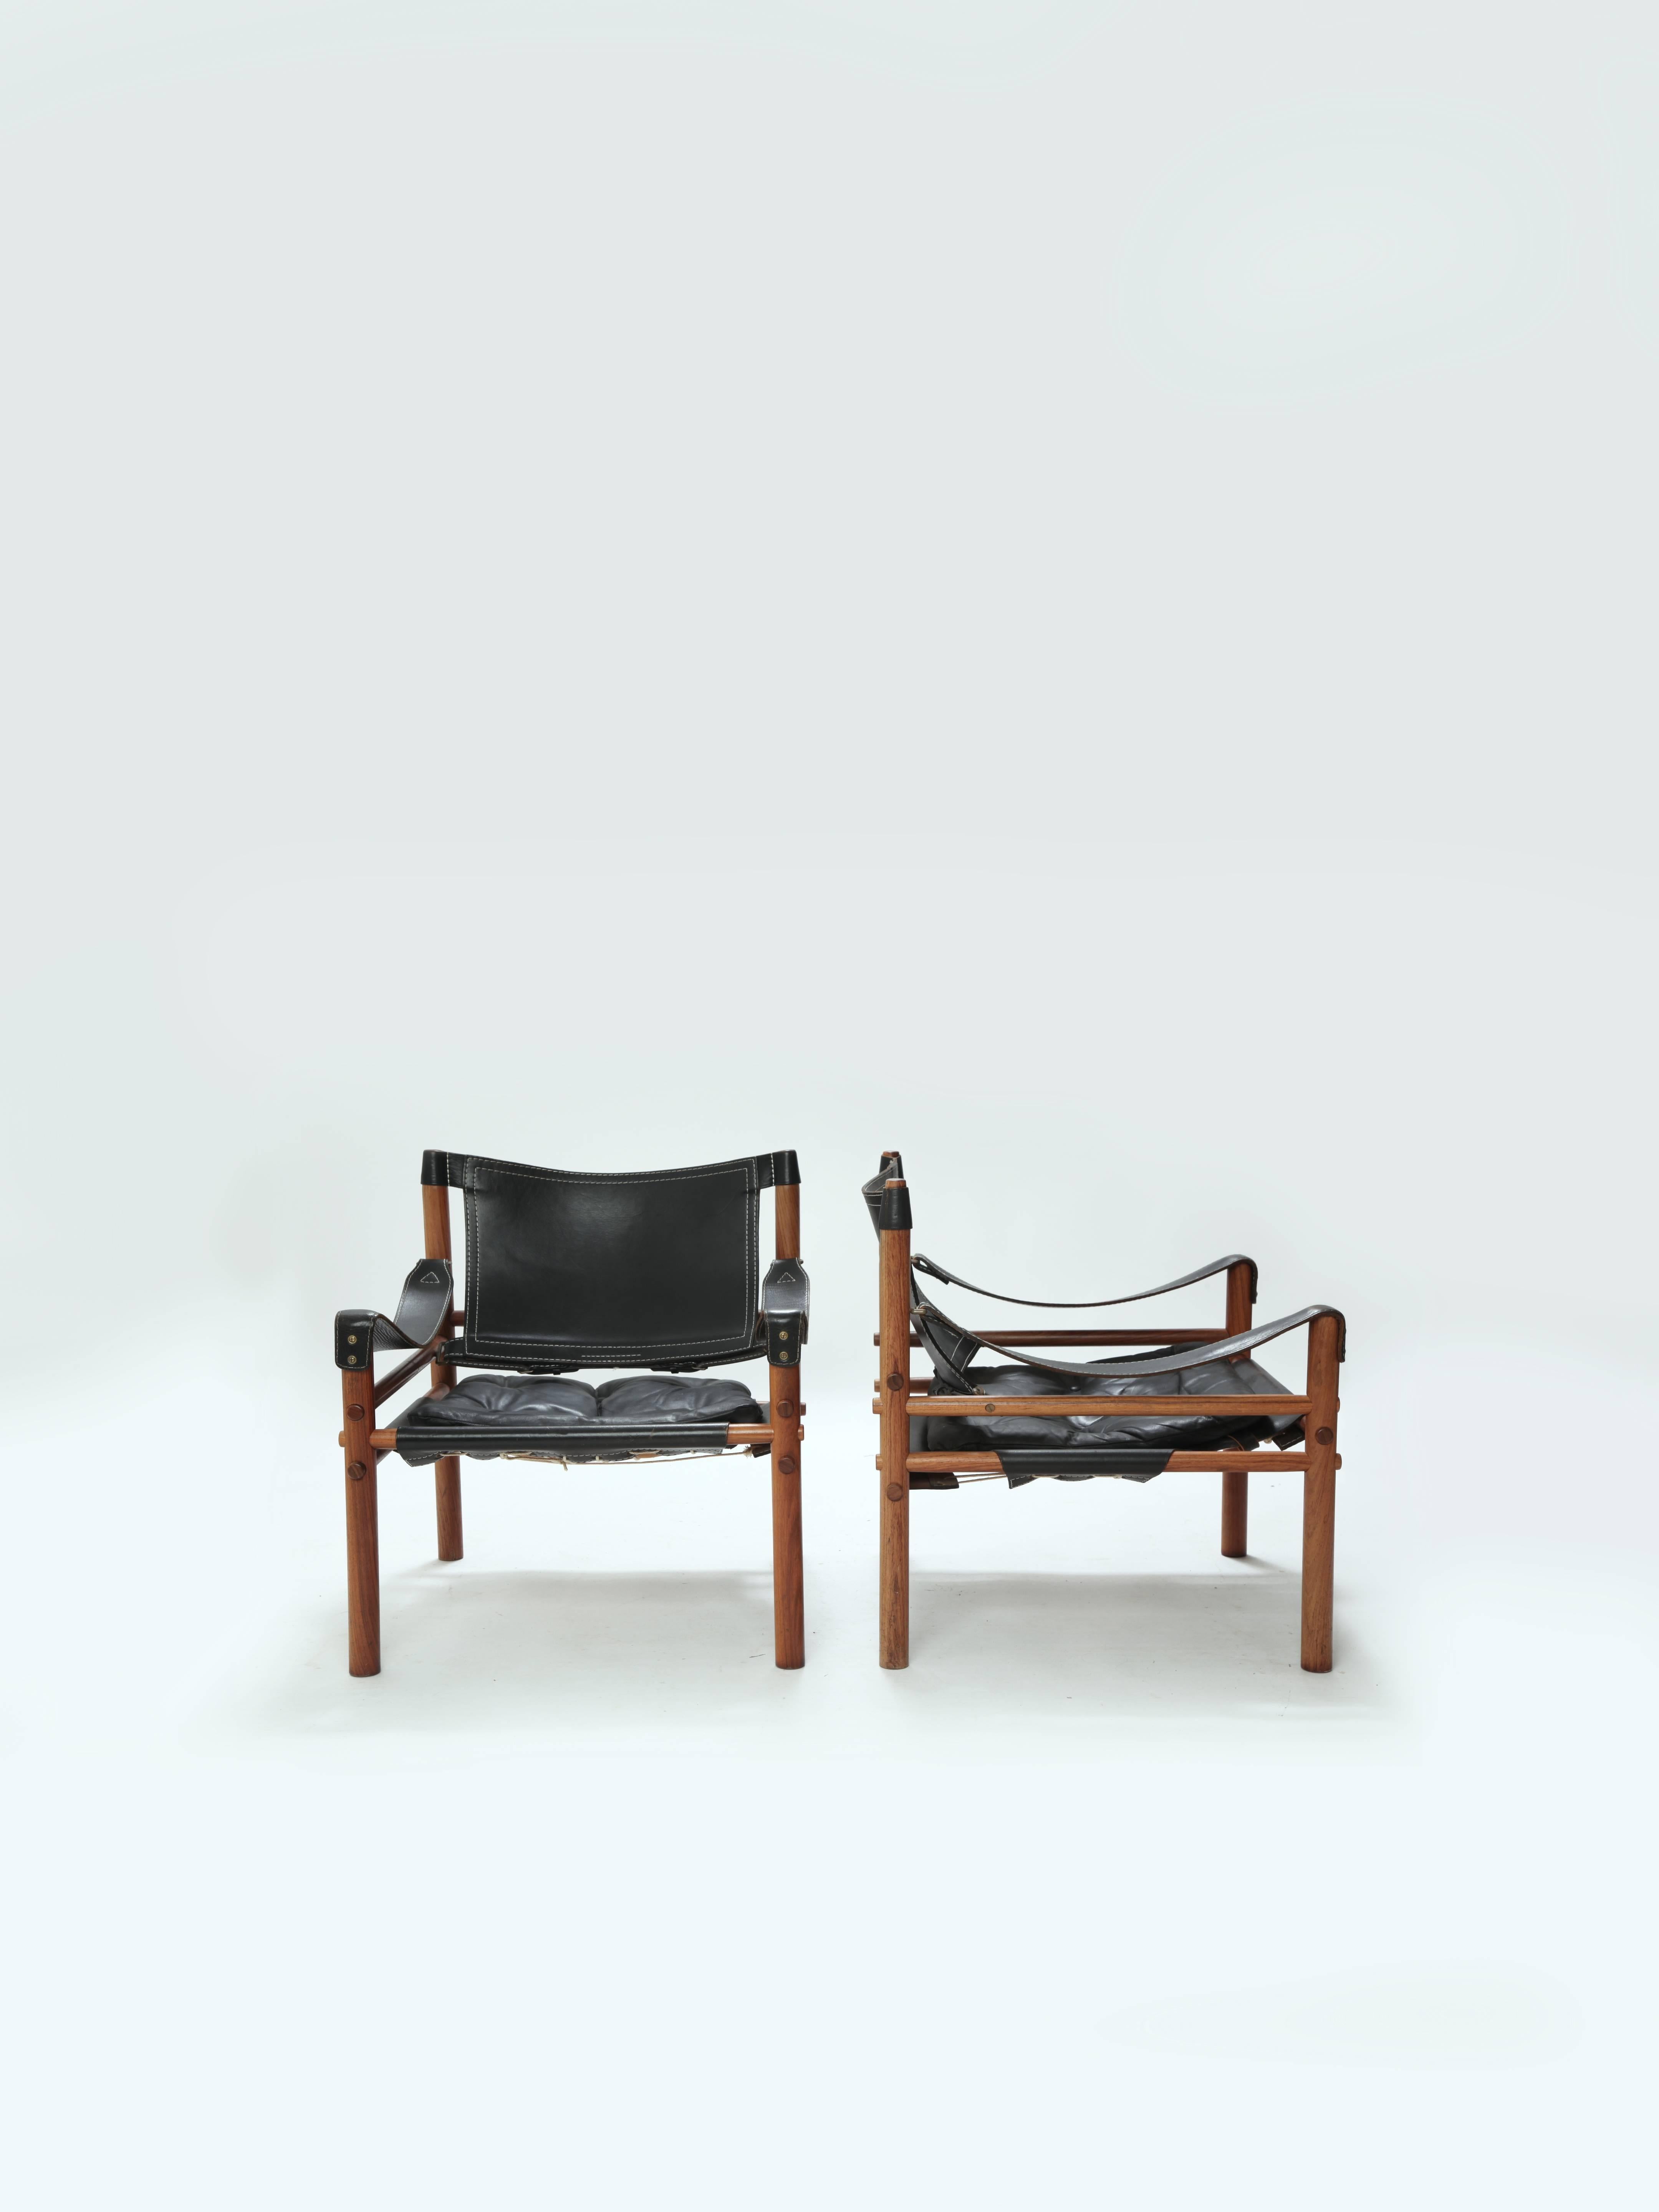 A stunning original pair of Arne Norell safari sirocco chair in rosewood and black leather, 1960s, Sweden. In excellent vintage condition. Made by Aneby Mobler. Fast and inexpensive shipping worldwide. The chairs will be disassembled for shipping